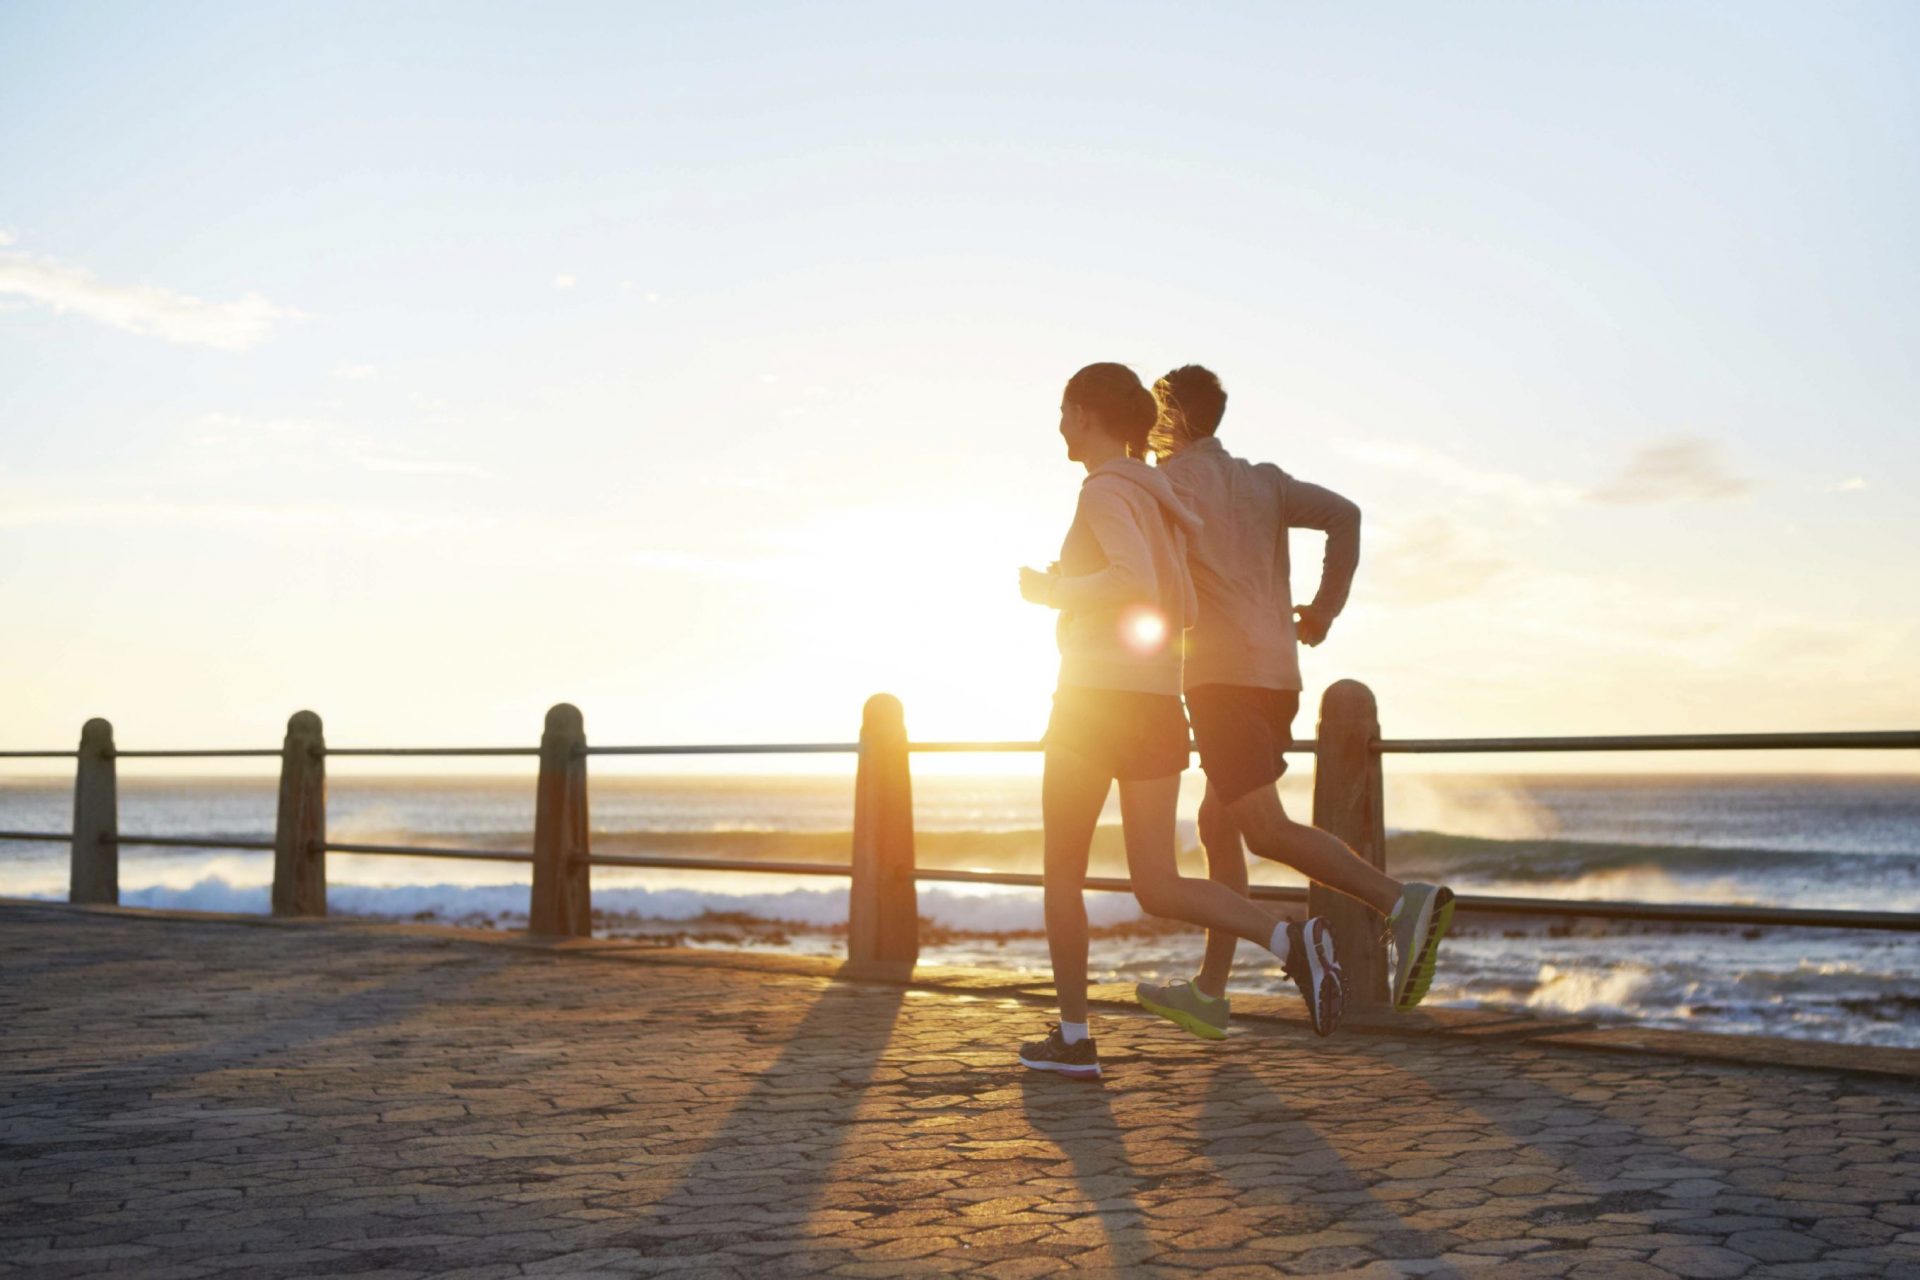 A young couple jogging on the promenade at sunset